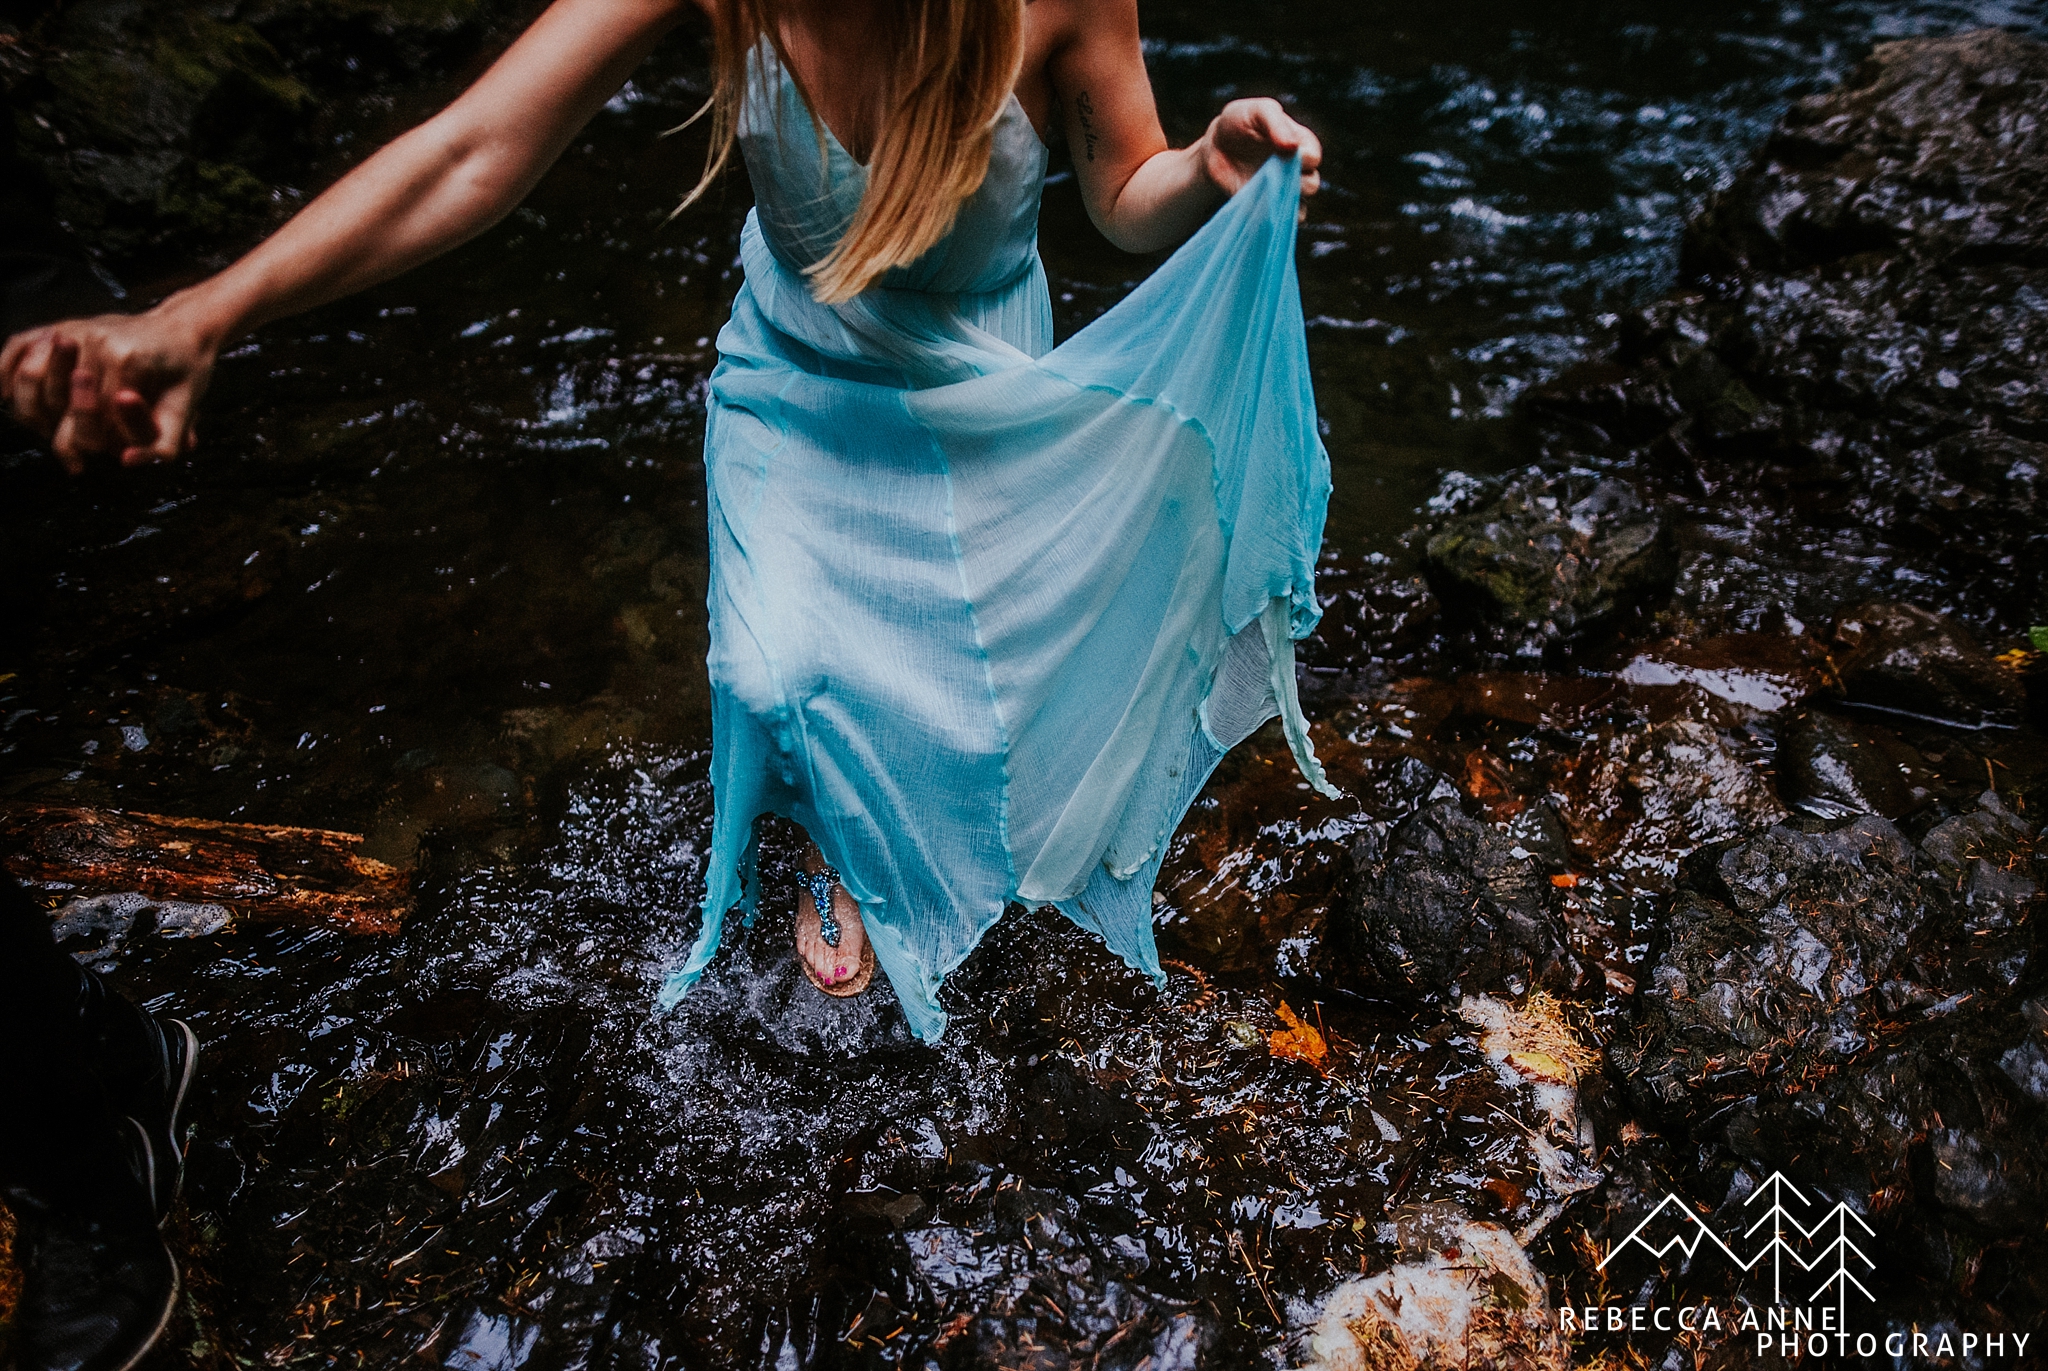 Wahclella Falls Engagement Natalie Peyton Adventure Engagement Seattle Wedding Photographer Peyton and natalie on the nicest day ever may 21 2018 podrobnee. wahclella falls engagement natalie peyton adventure engagement seattle wedding photographer